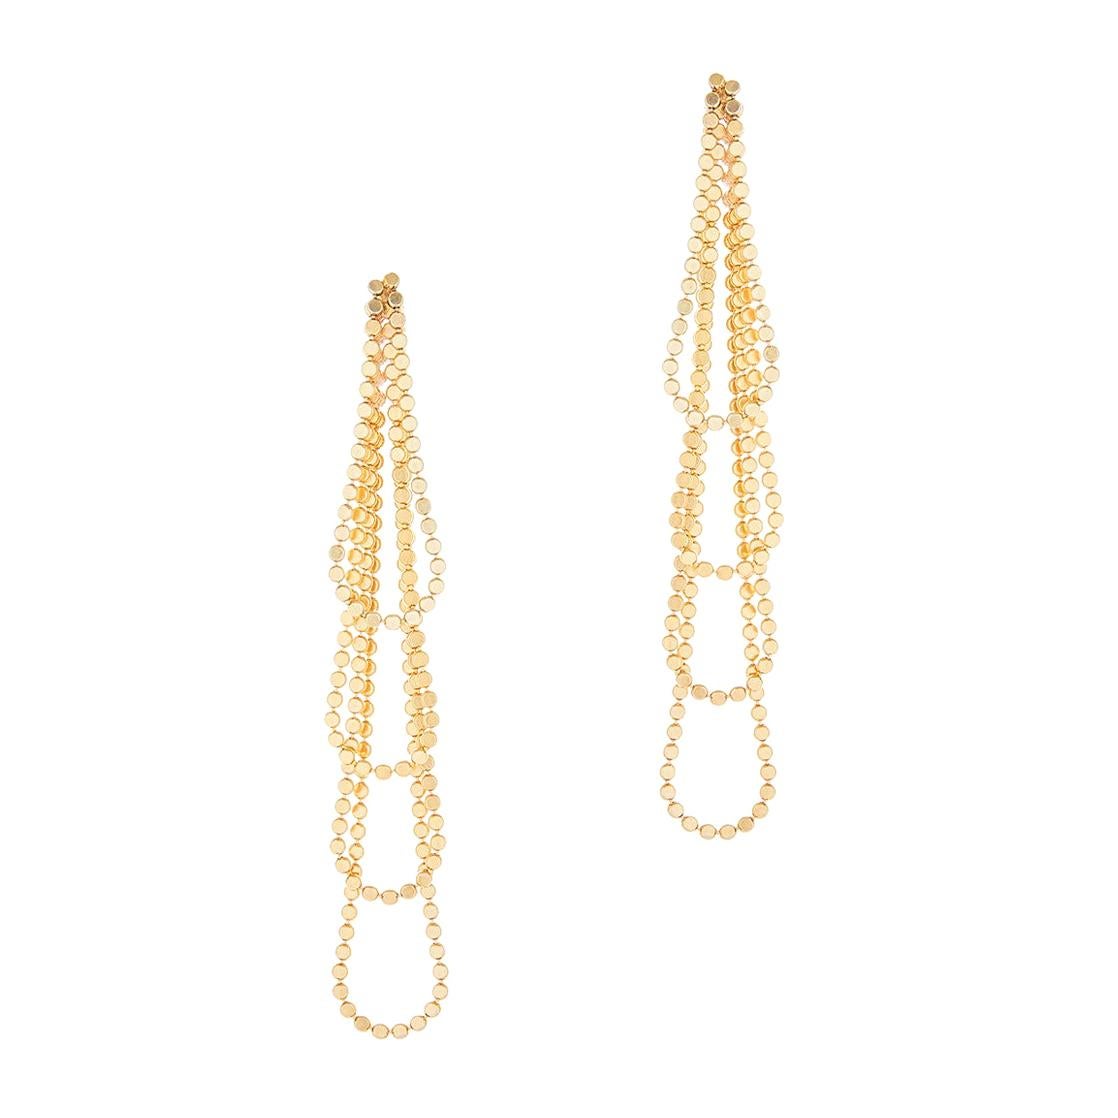  Earrings Chains Drops Round Motif Chain 18K Gold-Plated Silver Greek Earrings For Sale